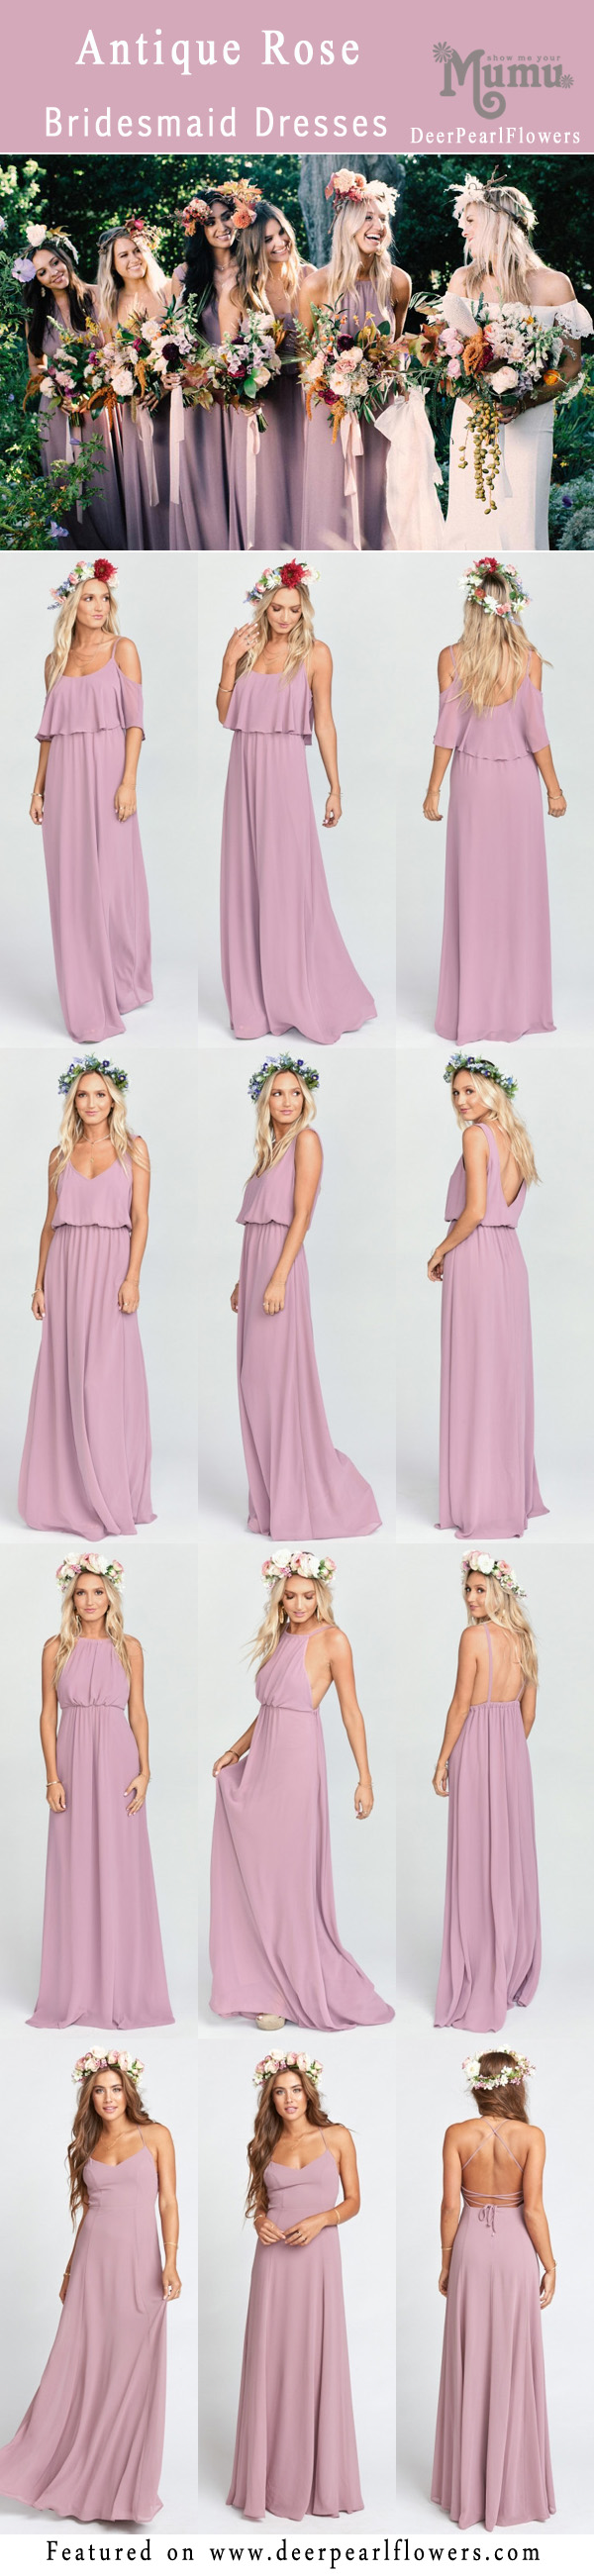 Top 8 Bridesmaid Dresses Color Trends for 2019 Deer